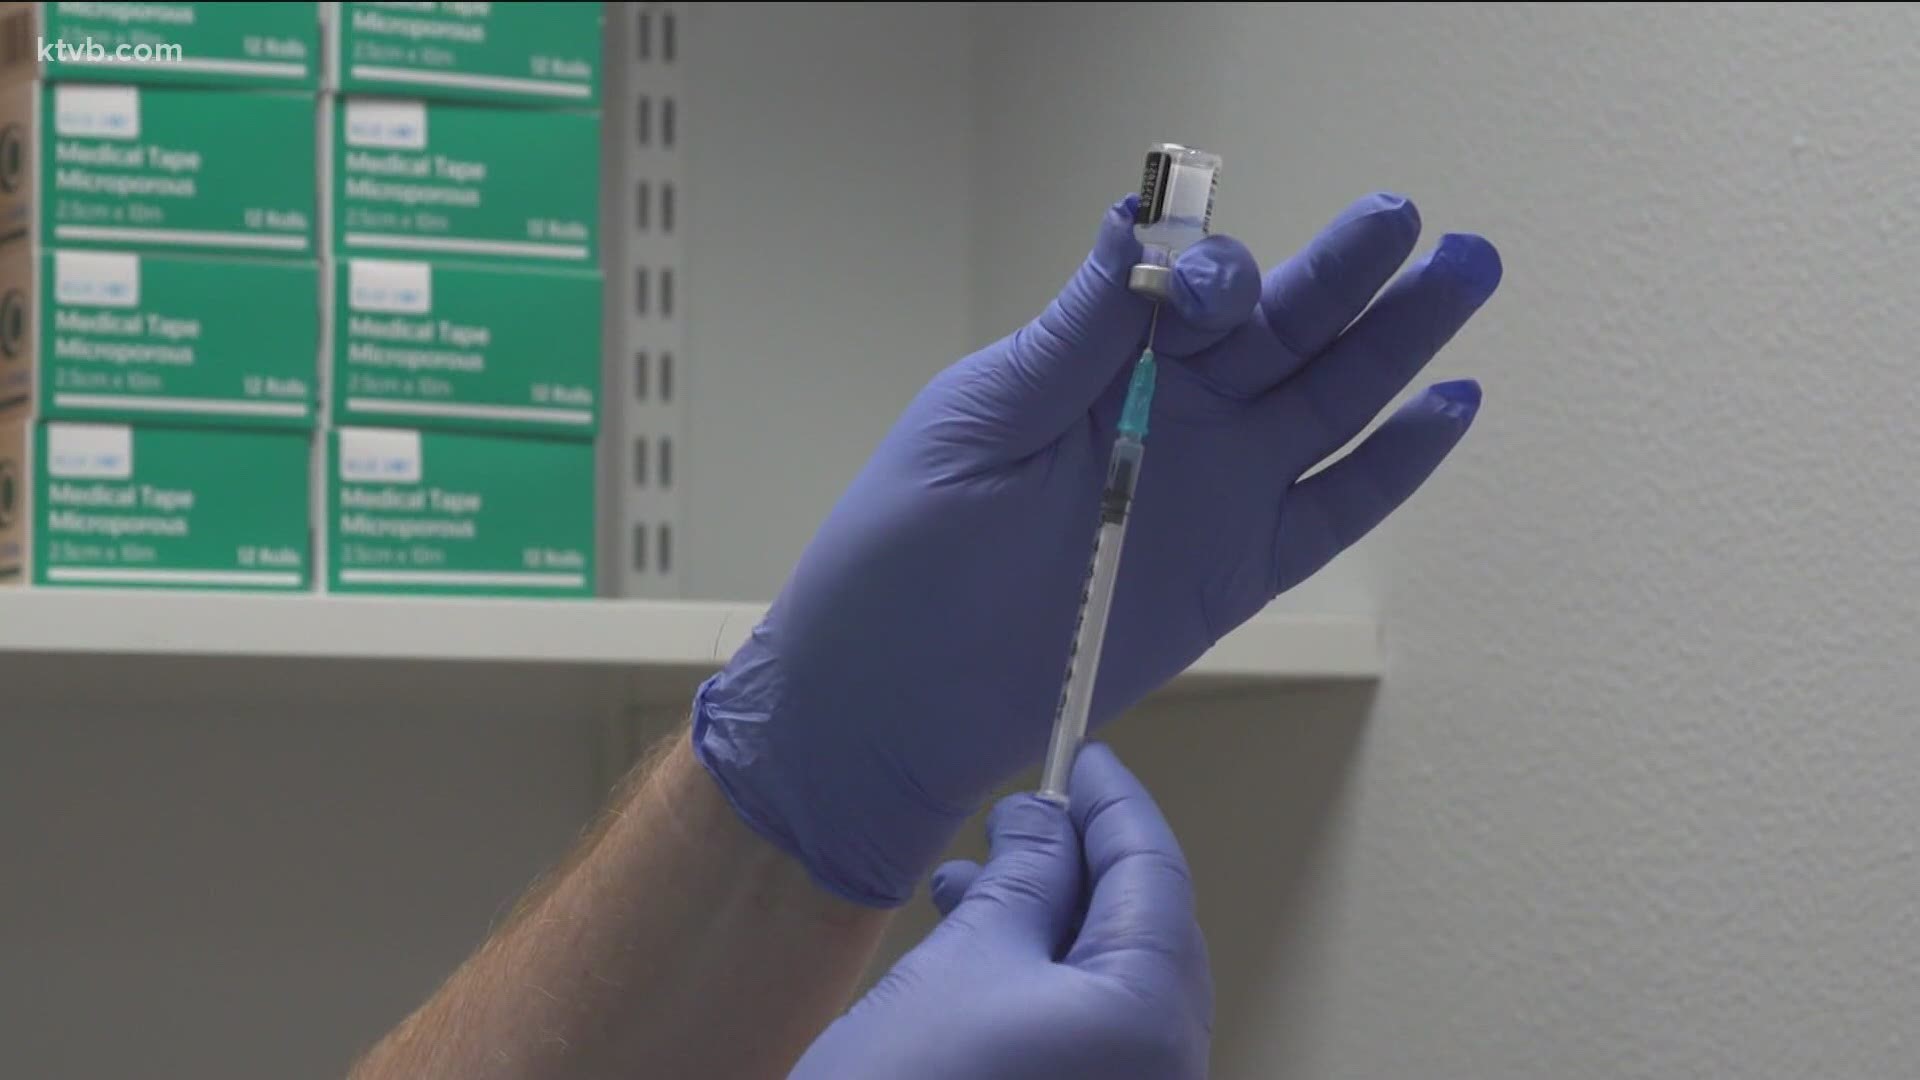 Next week, Idahoans 65 and older will be eligible to receive their first dose of the COVID-19 vaccine. That's 269,000 more people waiting to get a shot.